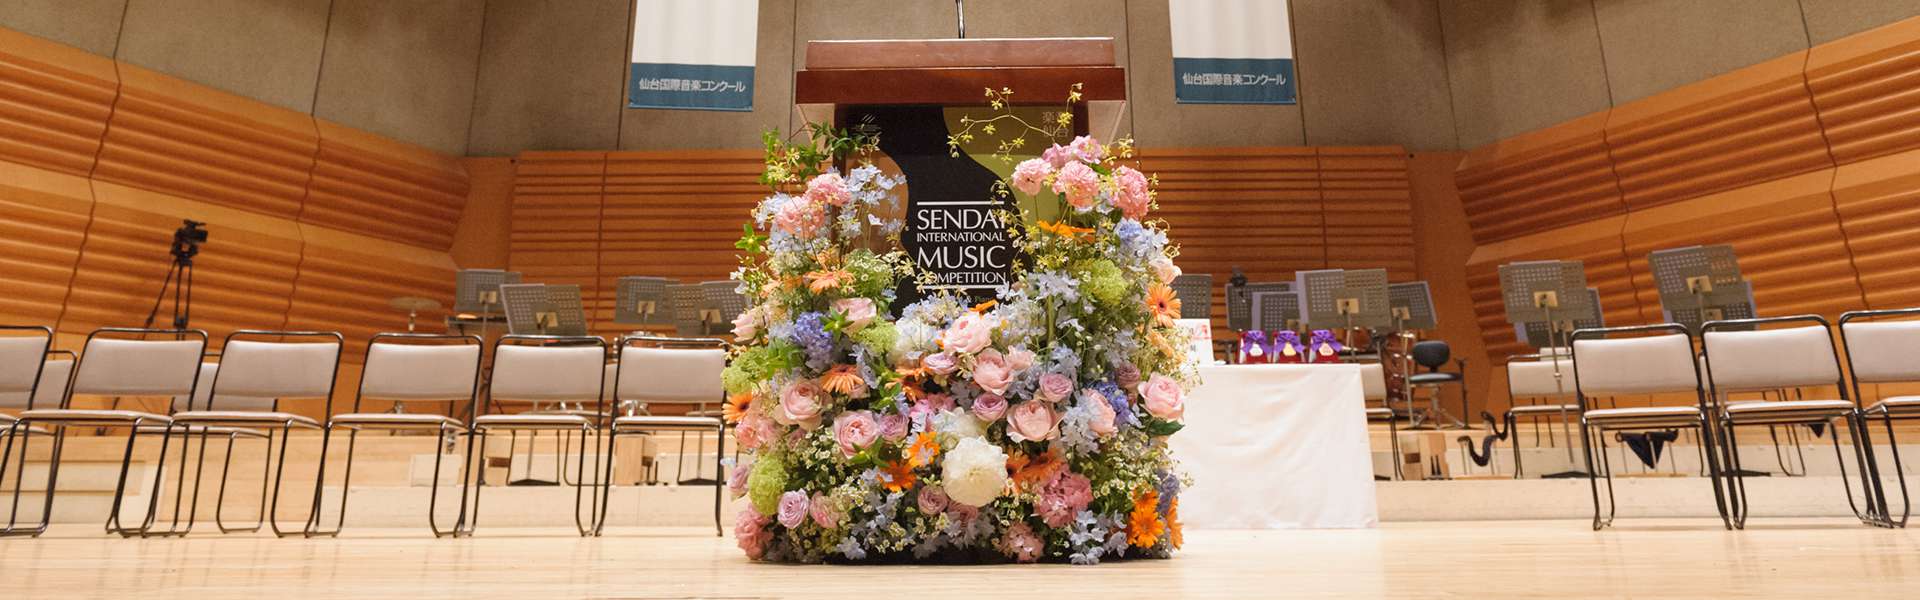 Program of Violin Section Prizewinners’ Gala Concert has been announced. | Sendai International Music Competition Official Website